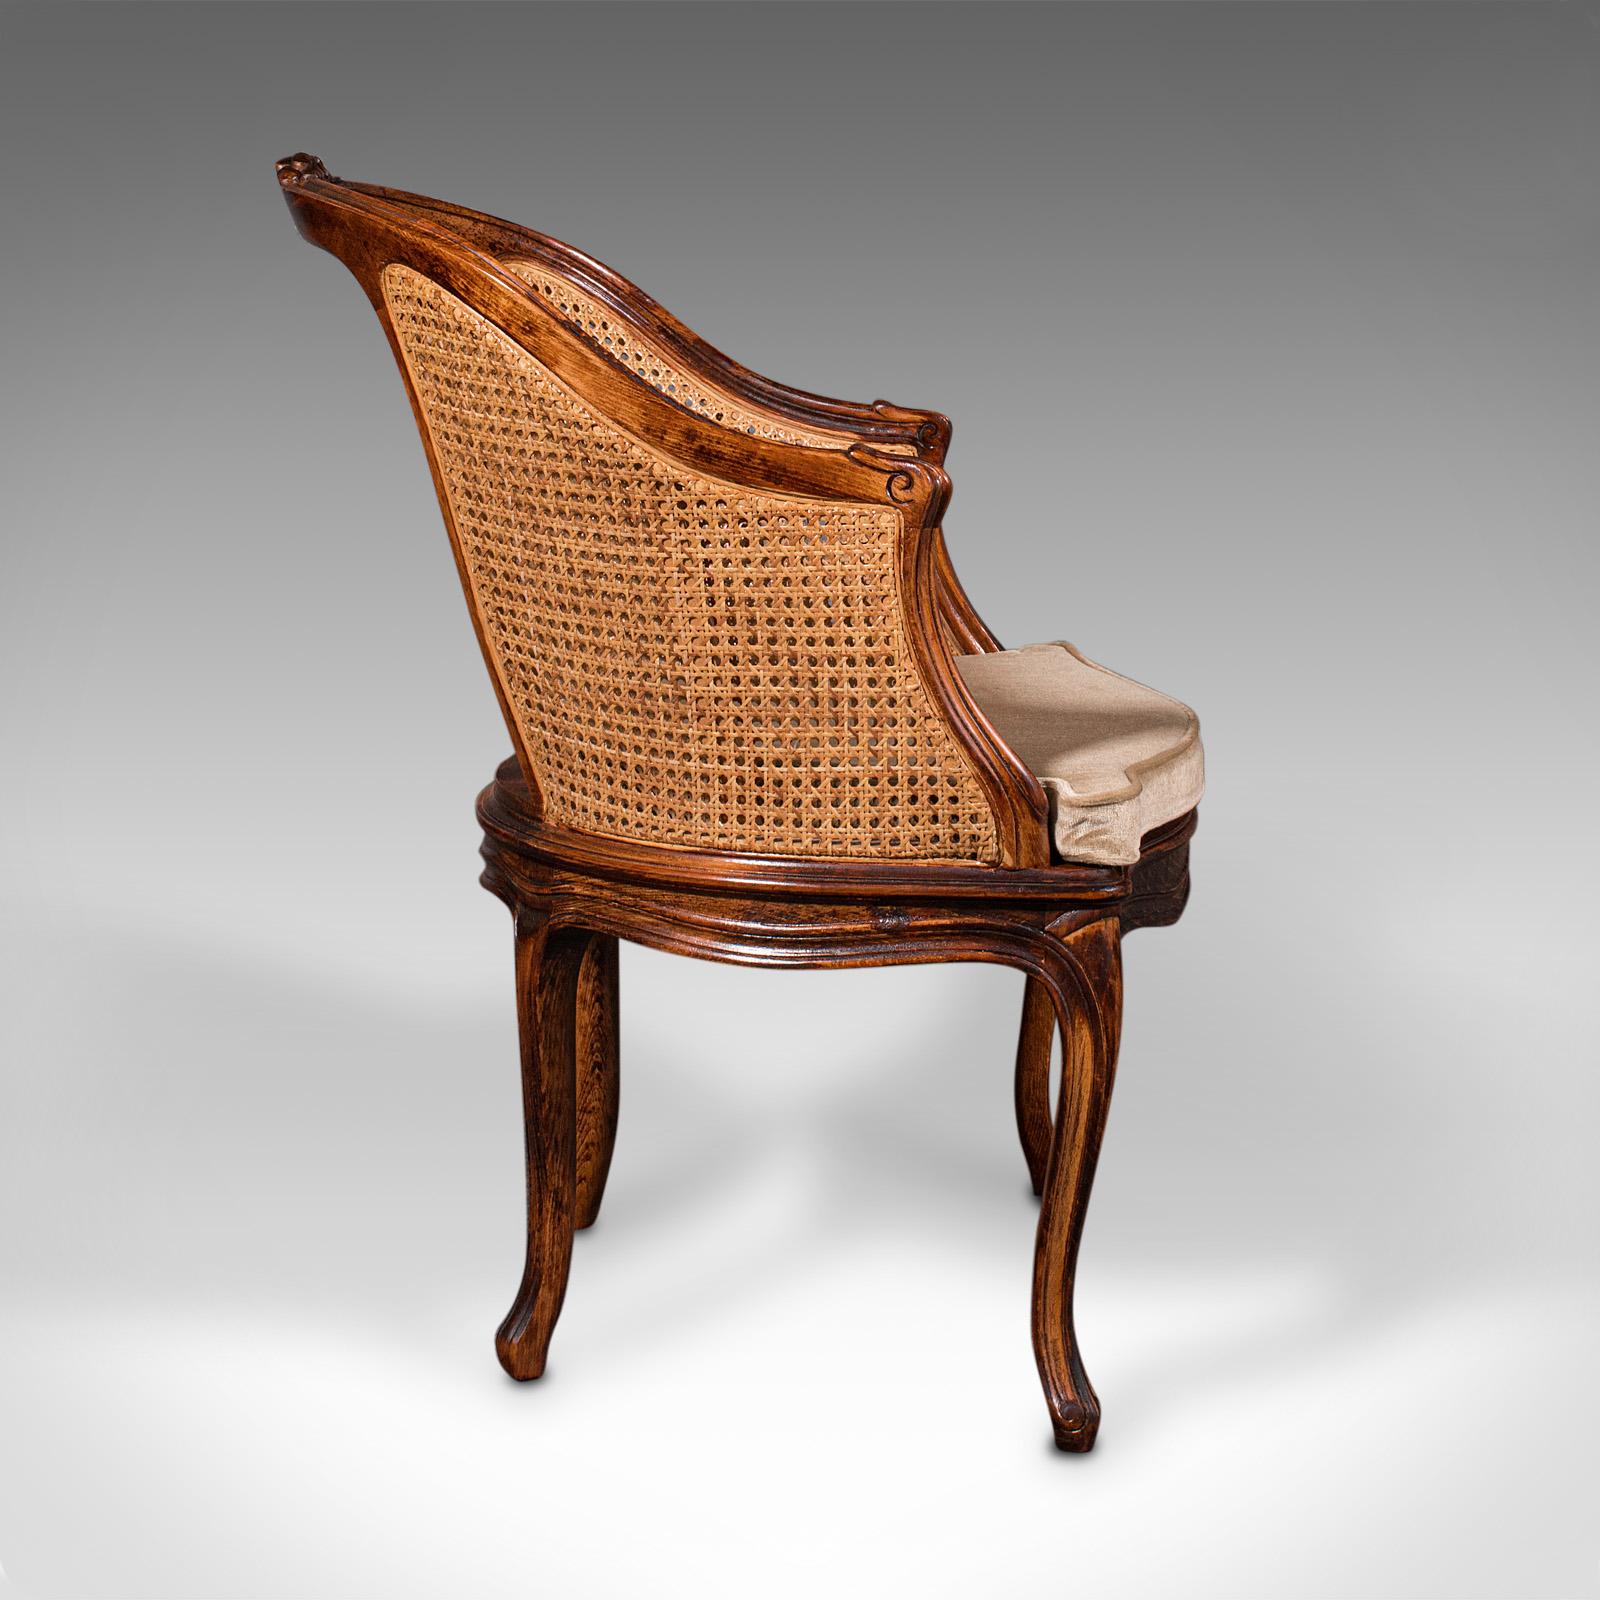 20th Century Pair Of Vintage Bergere Armchairs, French, Beech, Cane, Elbow Chair, Circa 1960